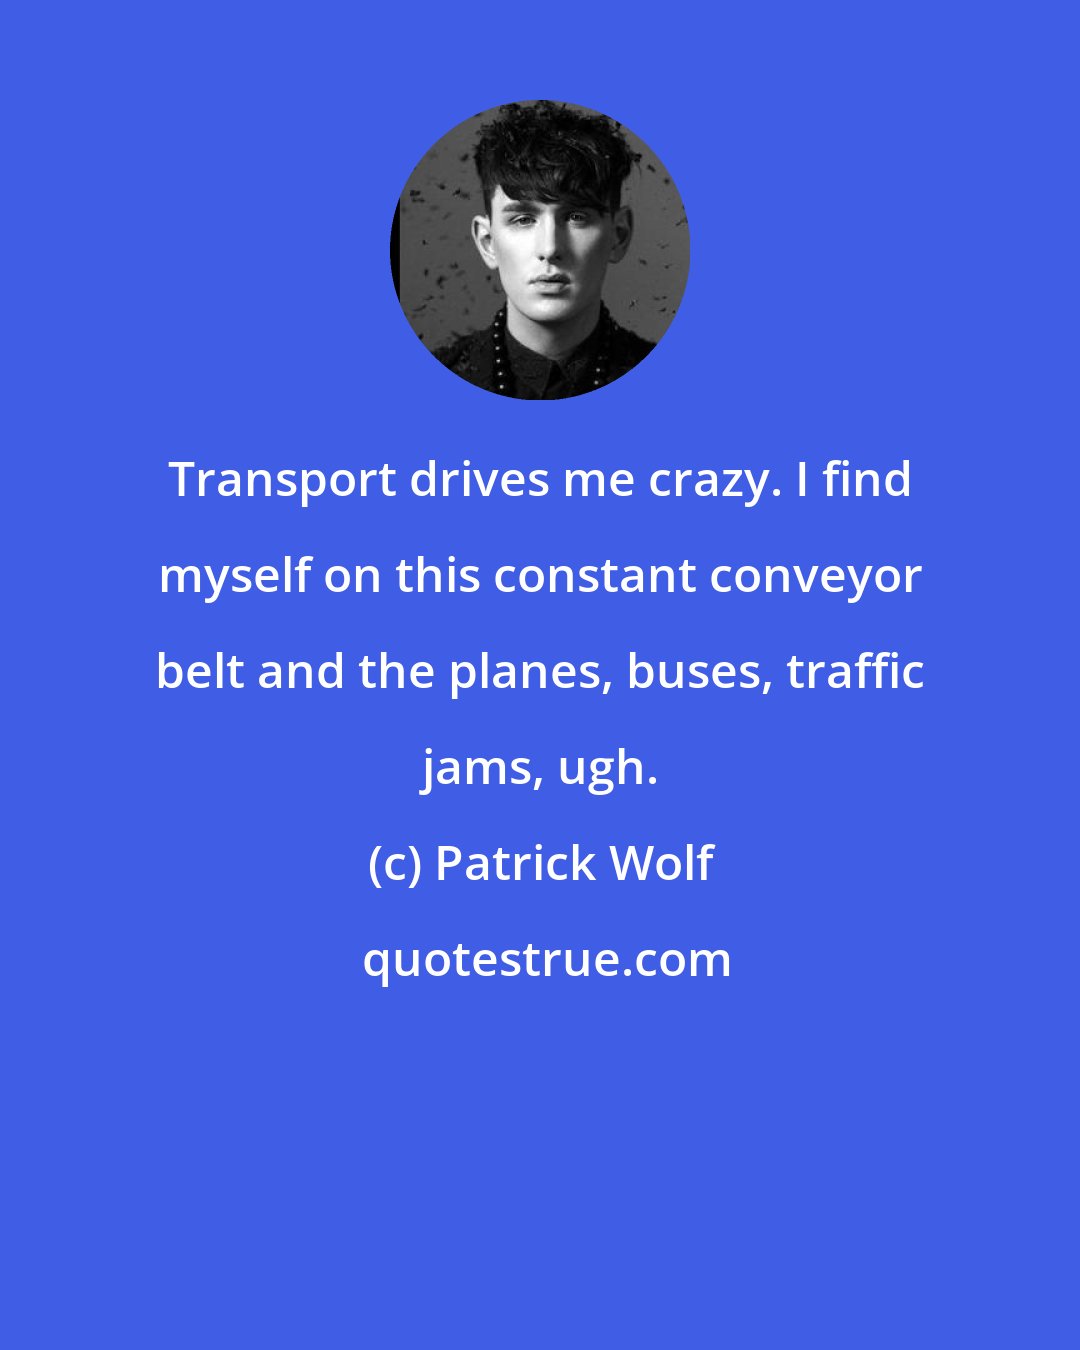 Patrick Wolf: Transport drives me crazy. I find myself on this constant conveyor belt and the planes, buses, traffic jams, ugh.